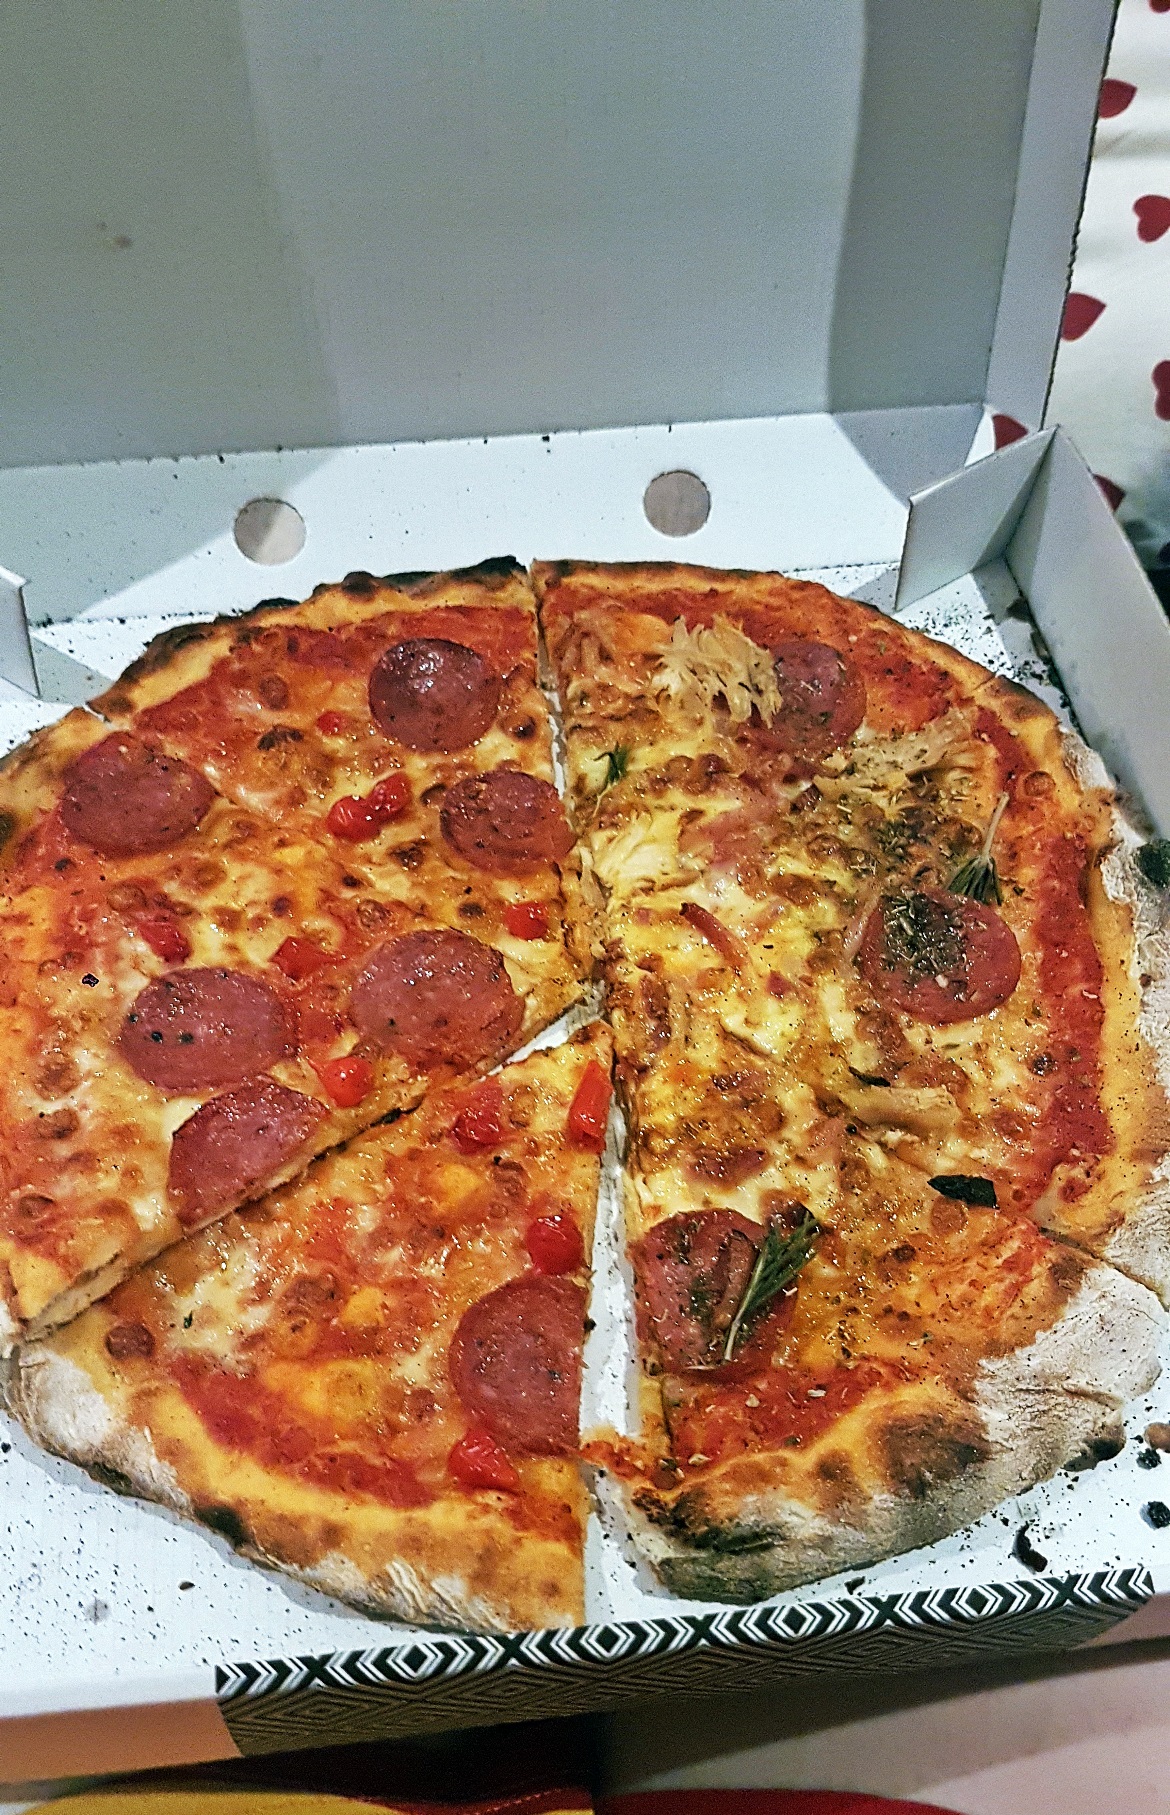 Pizza from Prezzo on Deliveroo - July 2017 Recap by BeckyBecky Blogs